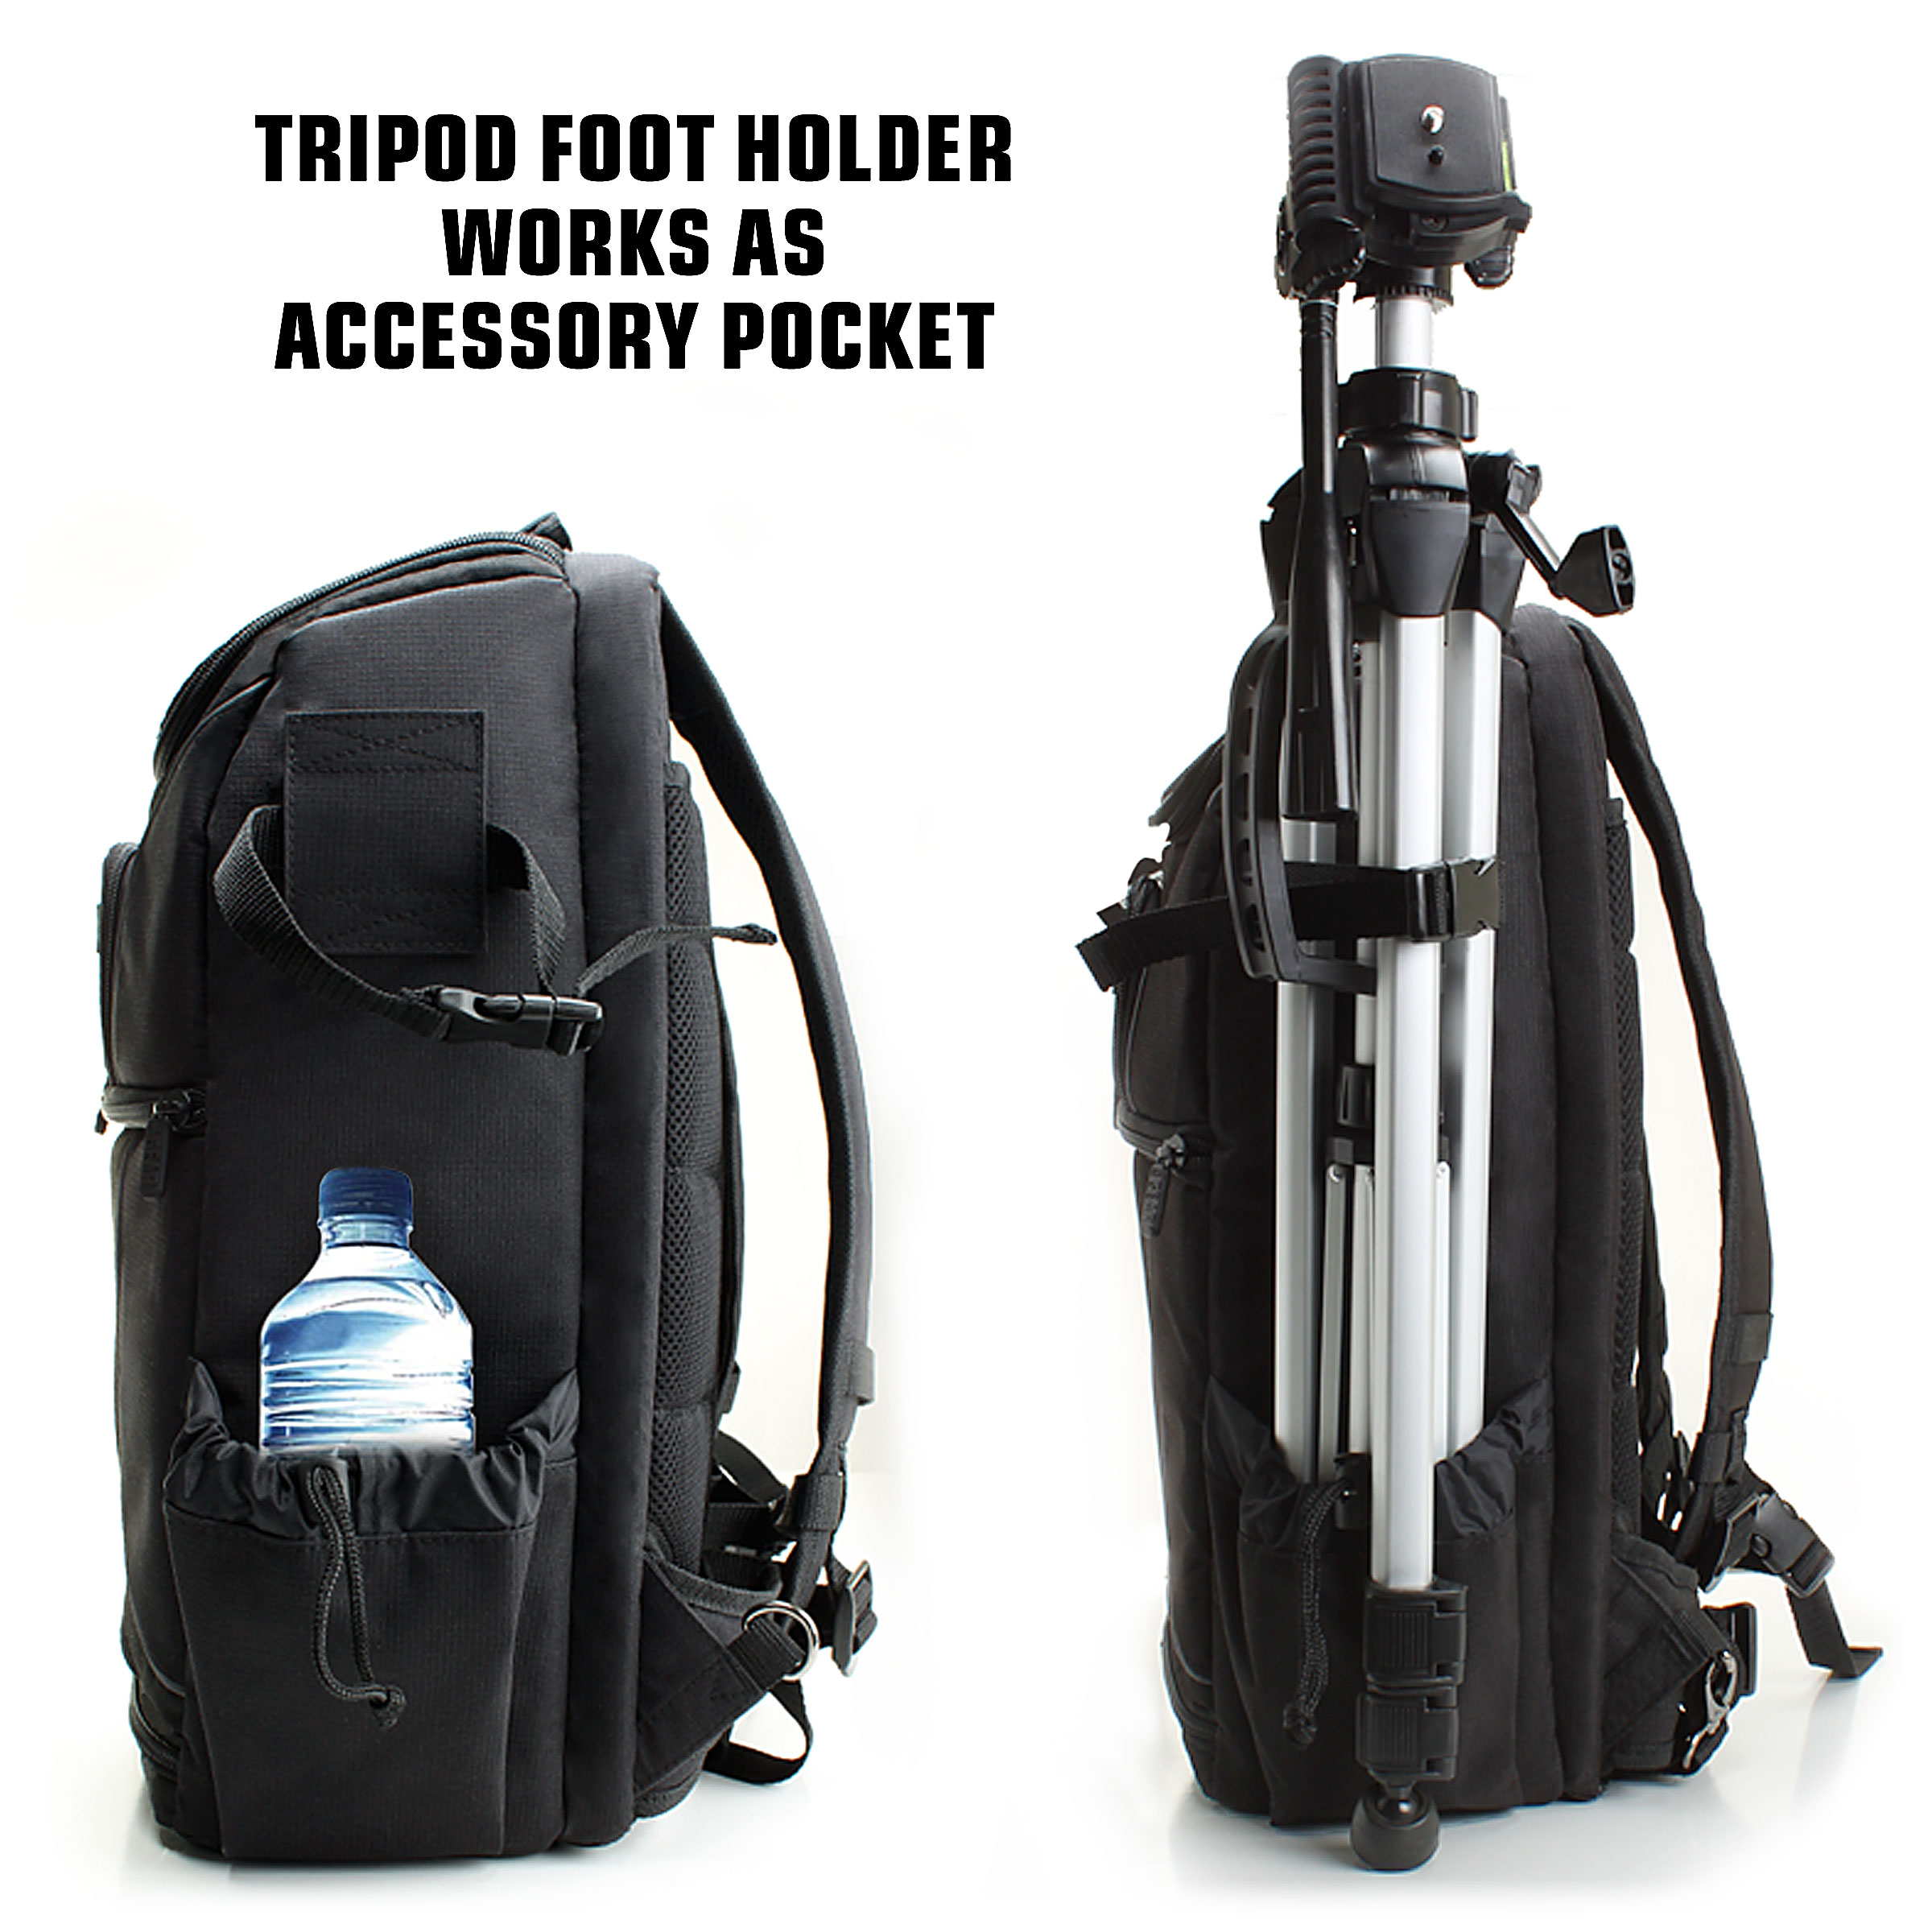 USA Gear Digital SLR Camera Backpack with Laptop Compartment , Rain Cover , Lens Storage for DSLR - image 5 of 9